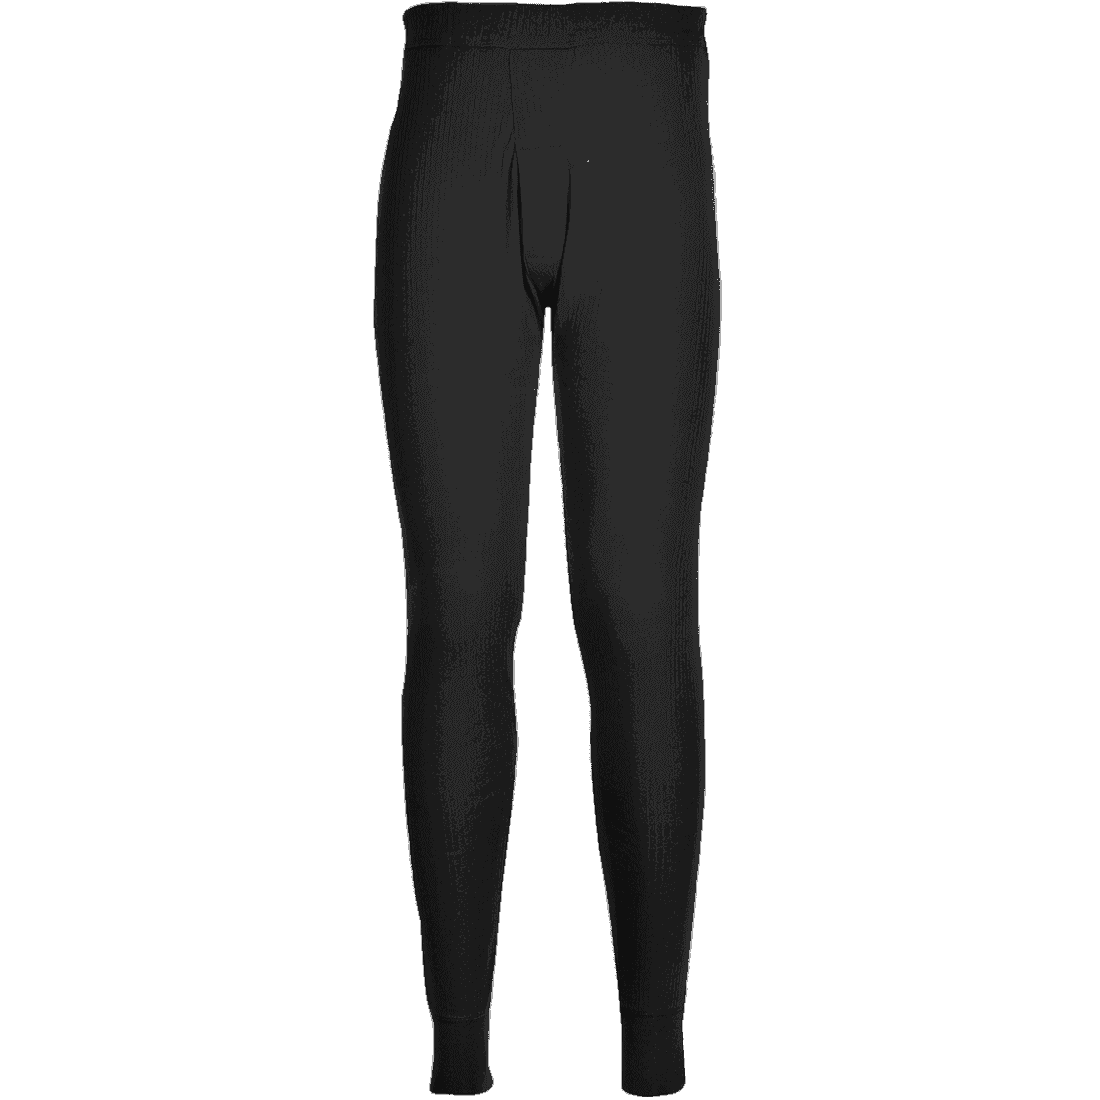 B121 Thermal Trousers Portwest Black